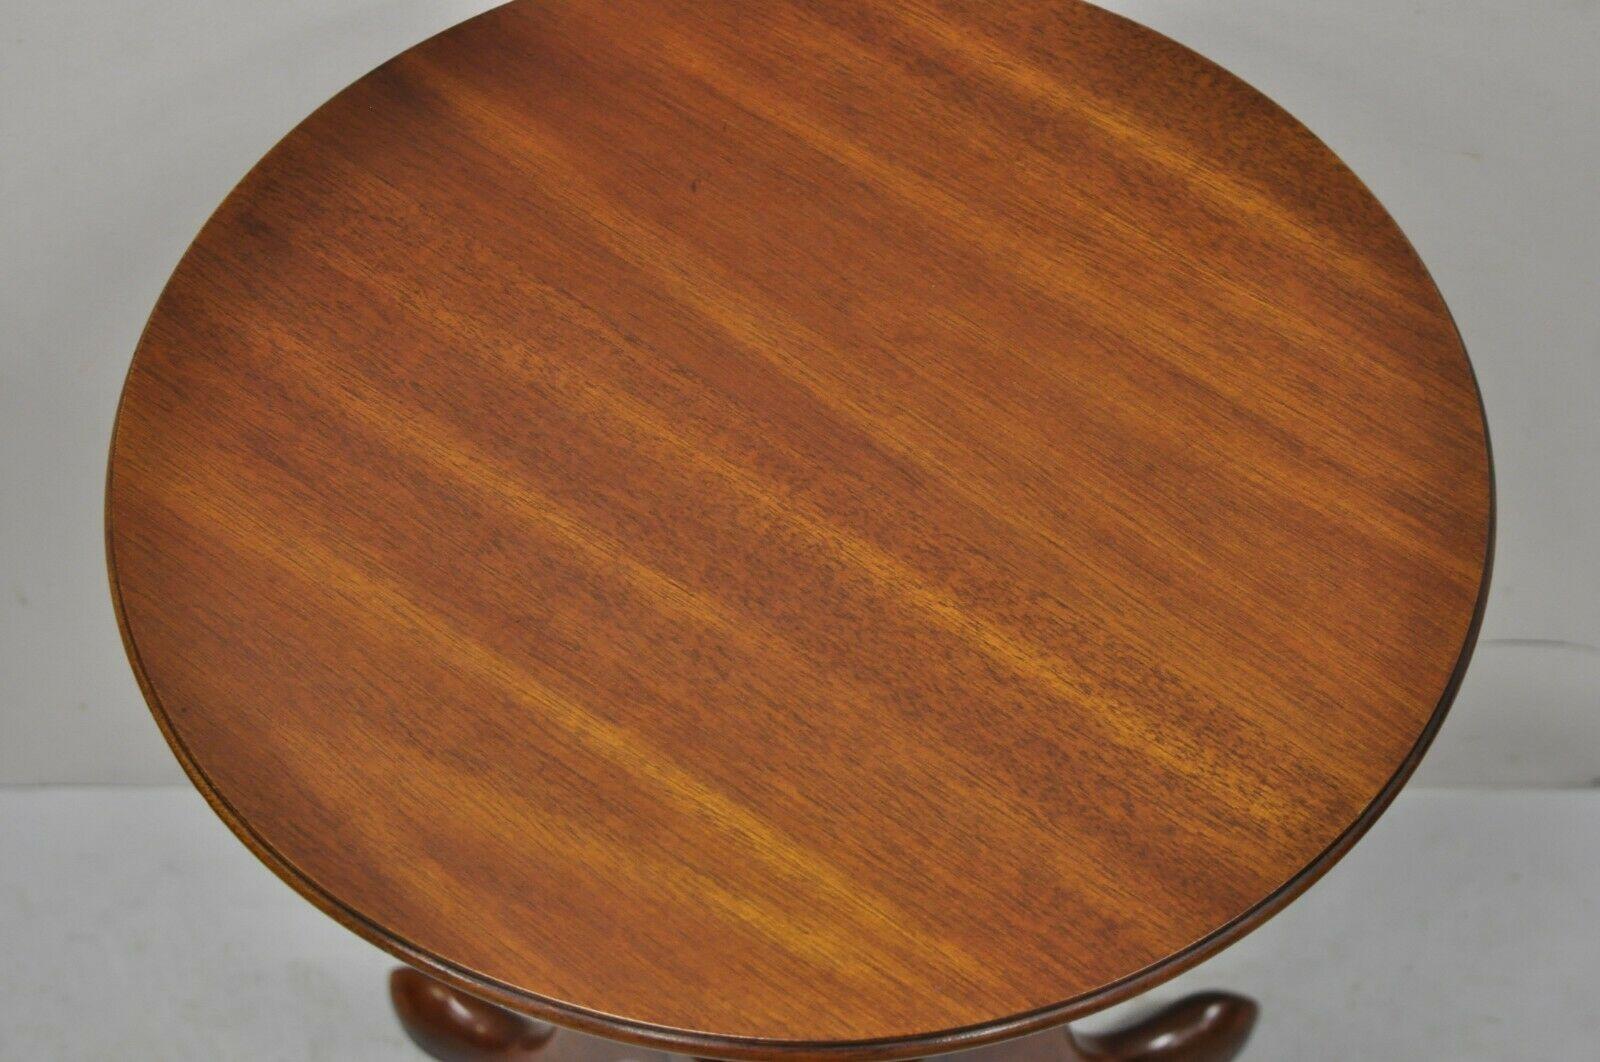 American Vintage Solid Cherry Wood Queen Anne Pedestal Base Round Lamp Tea Table